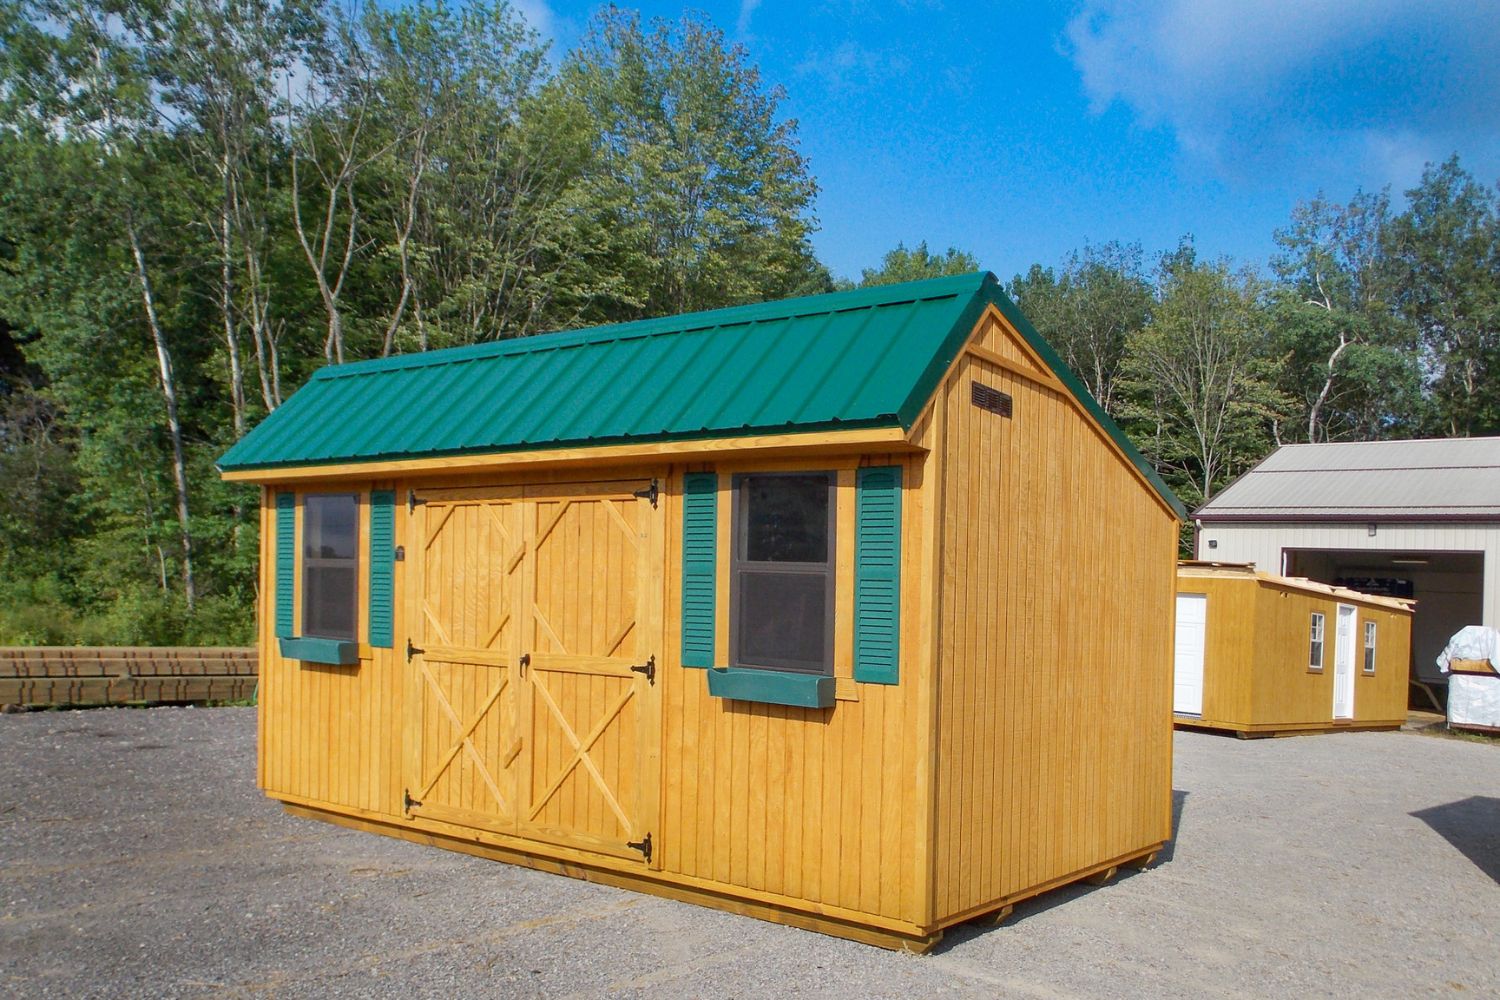 Roof Options for 8x16 Sheds